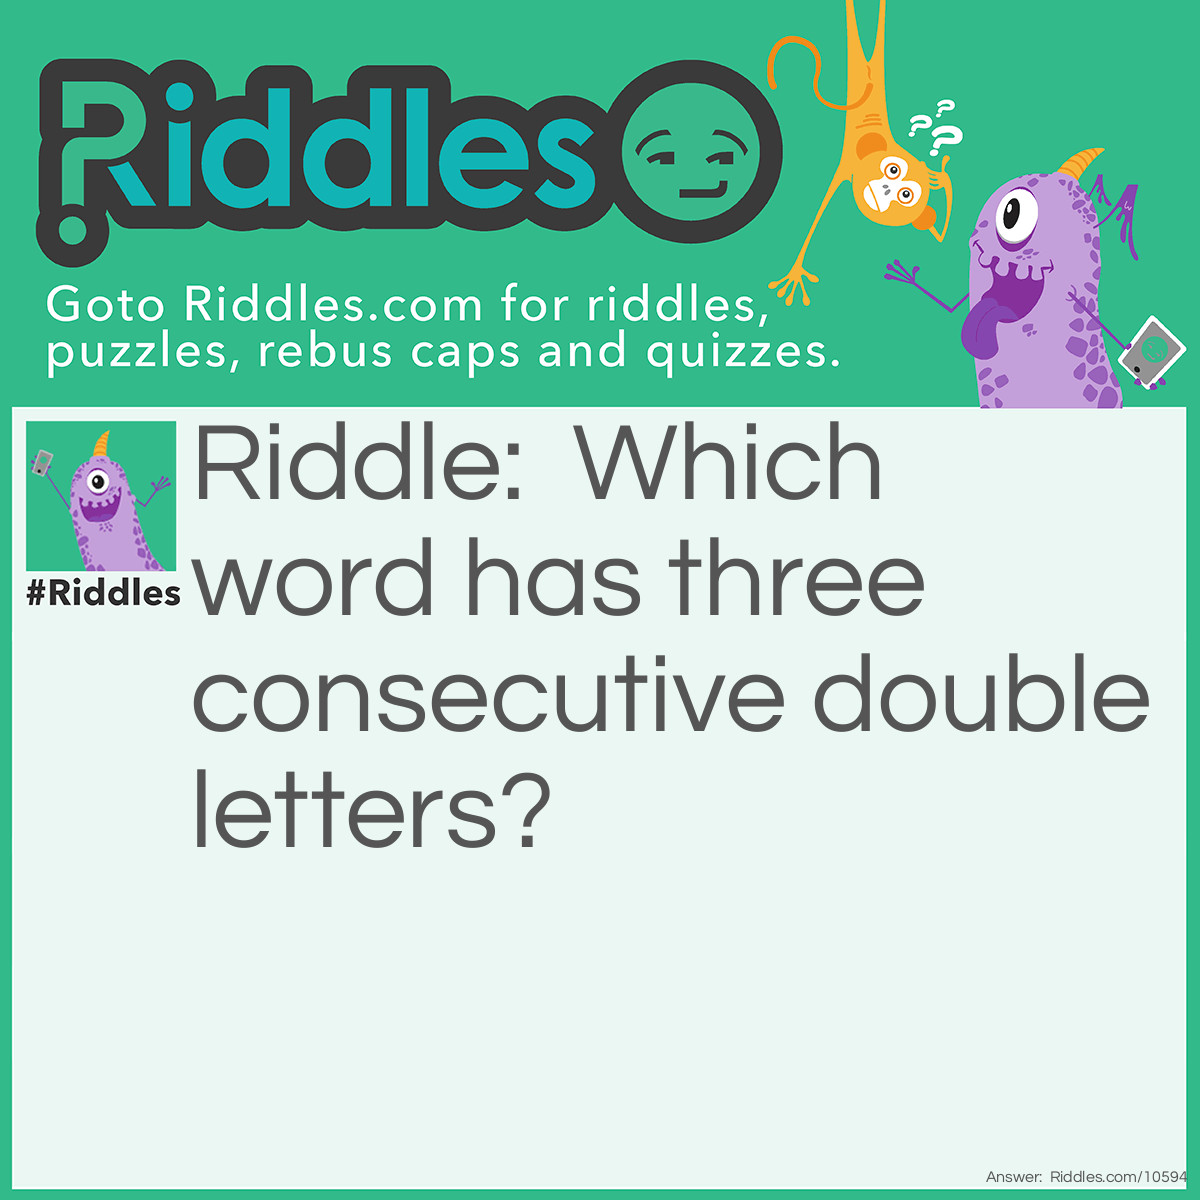 Riddle: Which word has three consecutive double letters? Answer: Bookkeeper